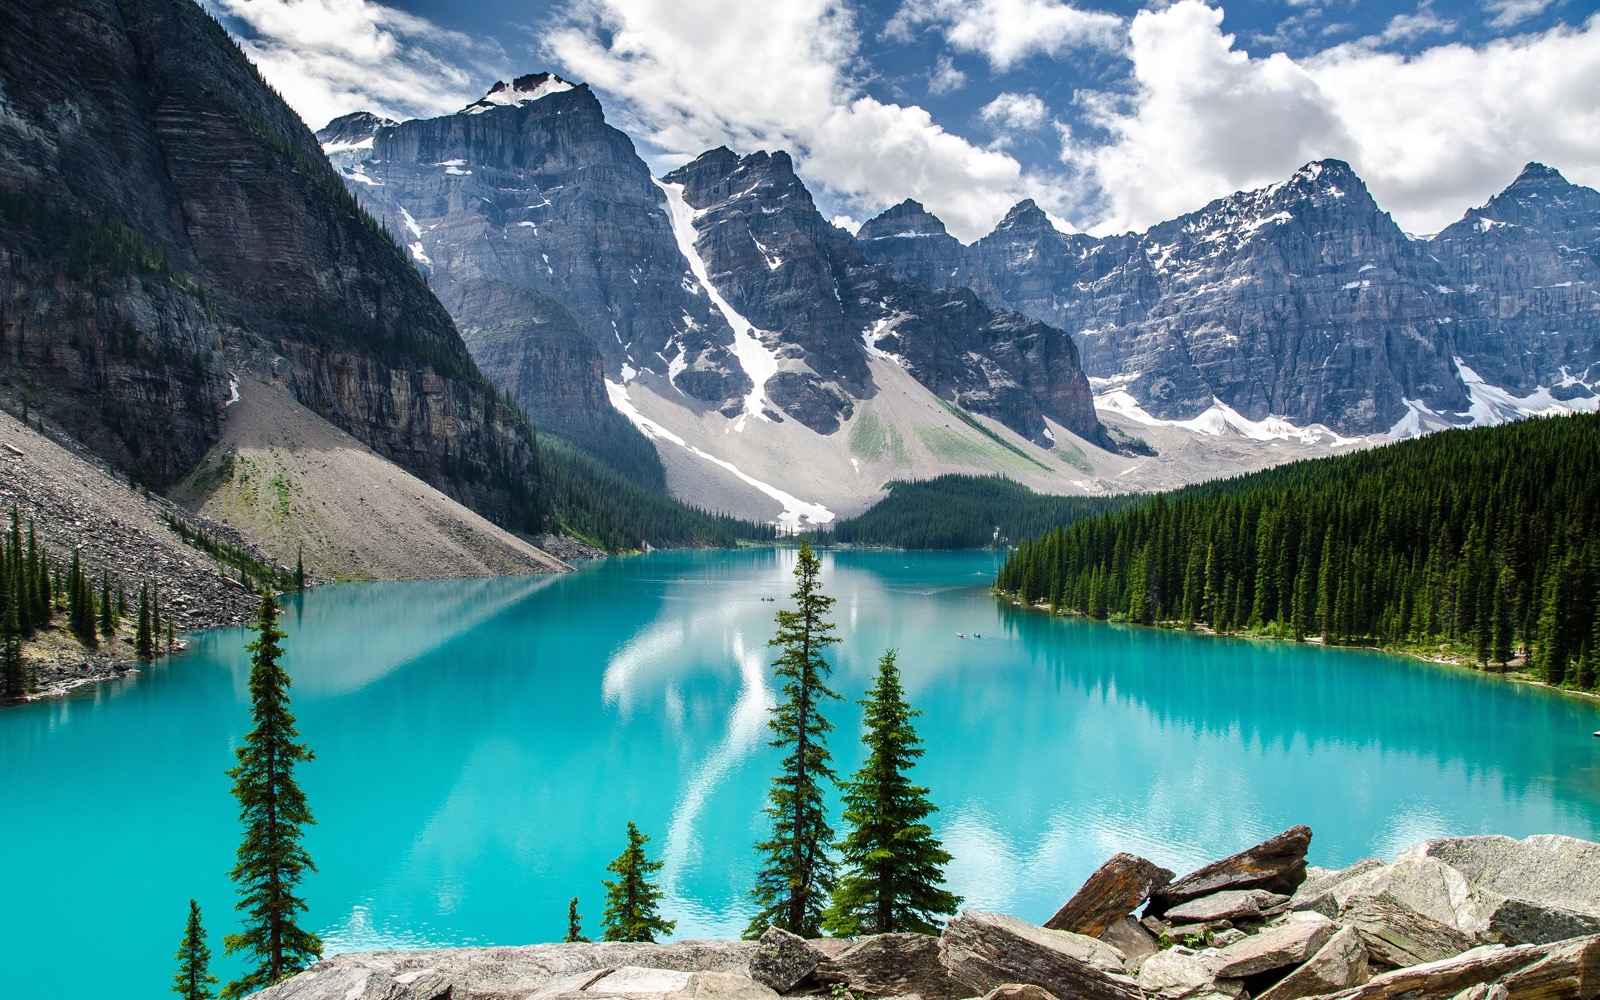 If You Can Get at Least 15 on This 20-Question World Landmarks Quiz, You Can Safely Travel the World Without Getting Lost Moraine Lake, Banff National Park, Canada